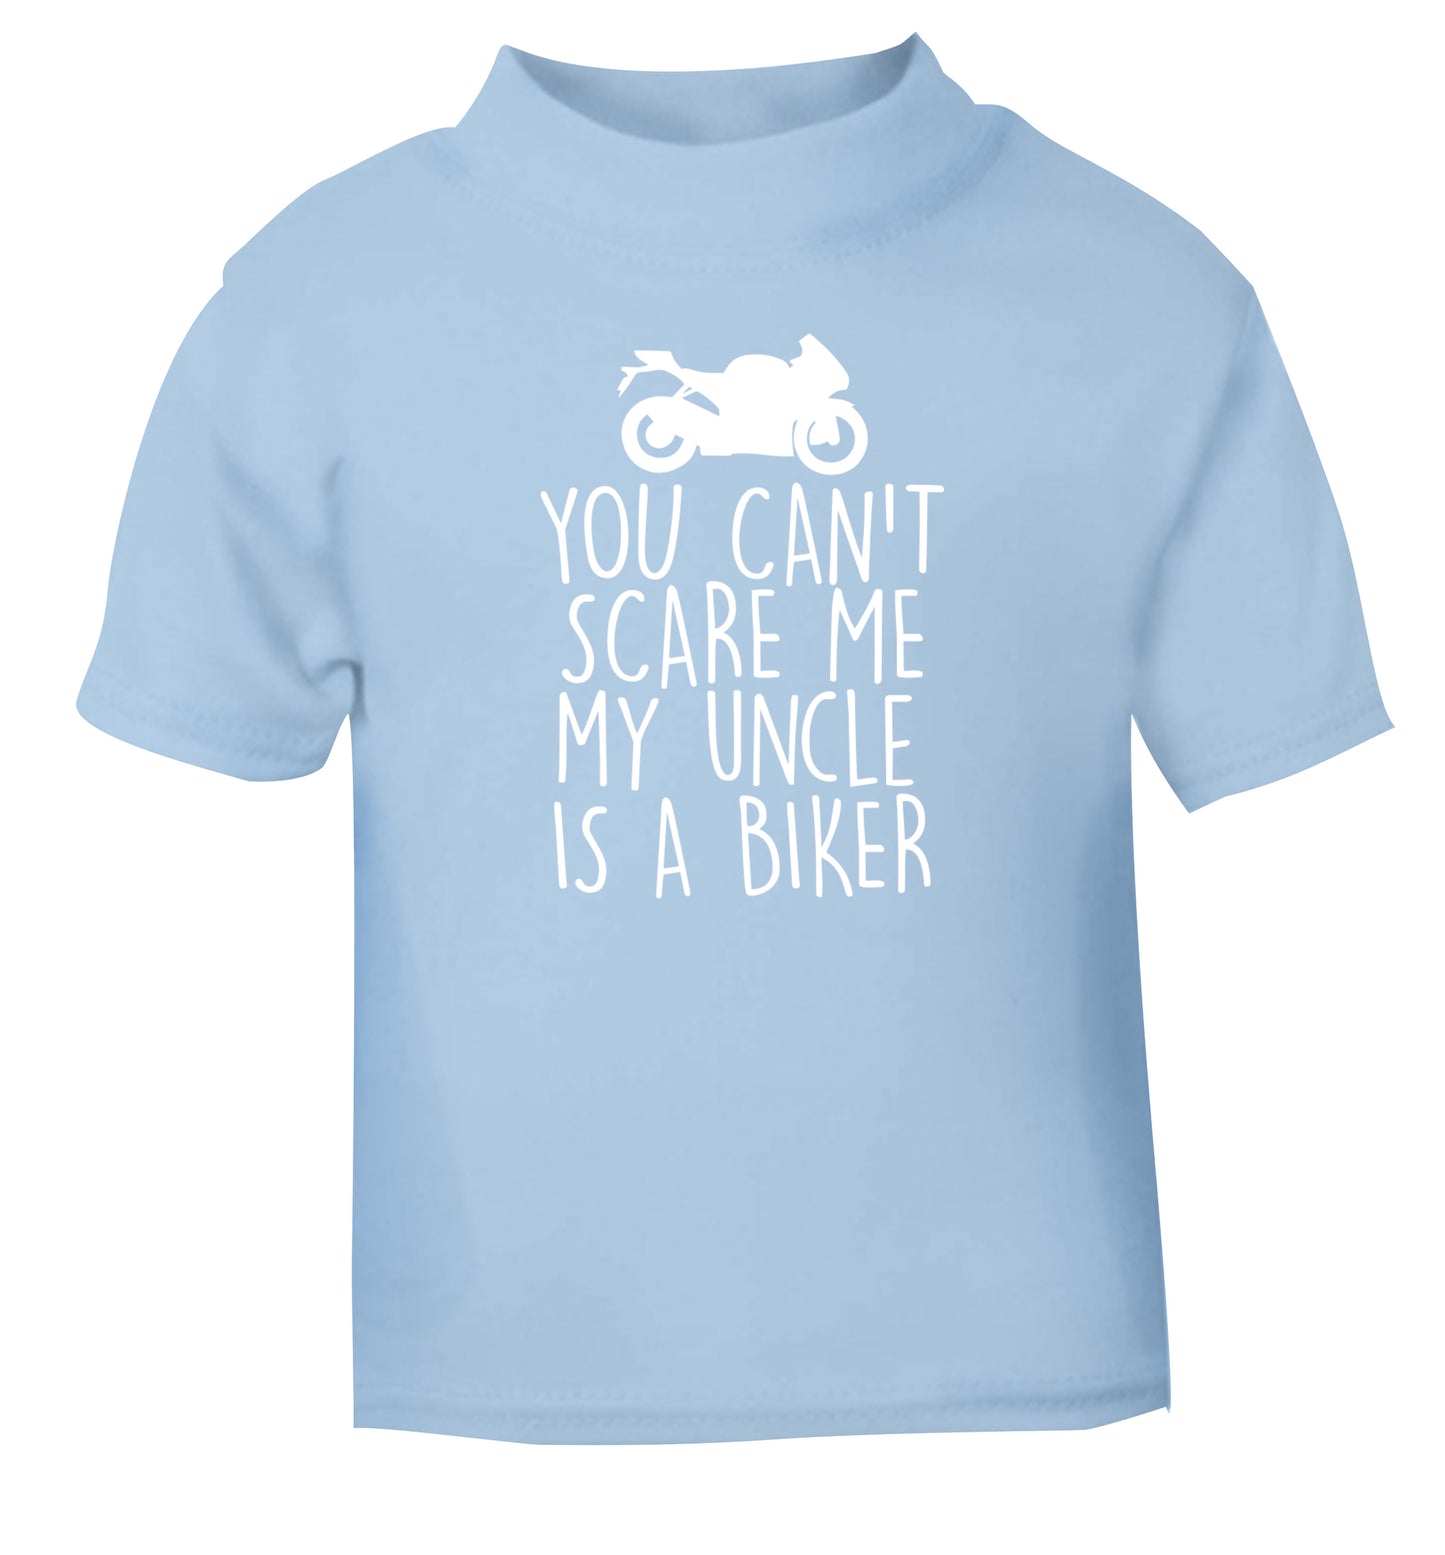 You can't scare me my uncle is a biker light blue Baby Toddler Tshirt 2 Years